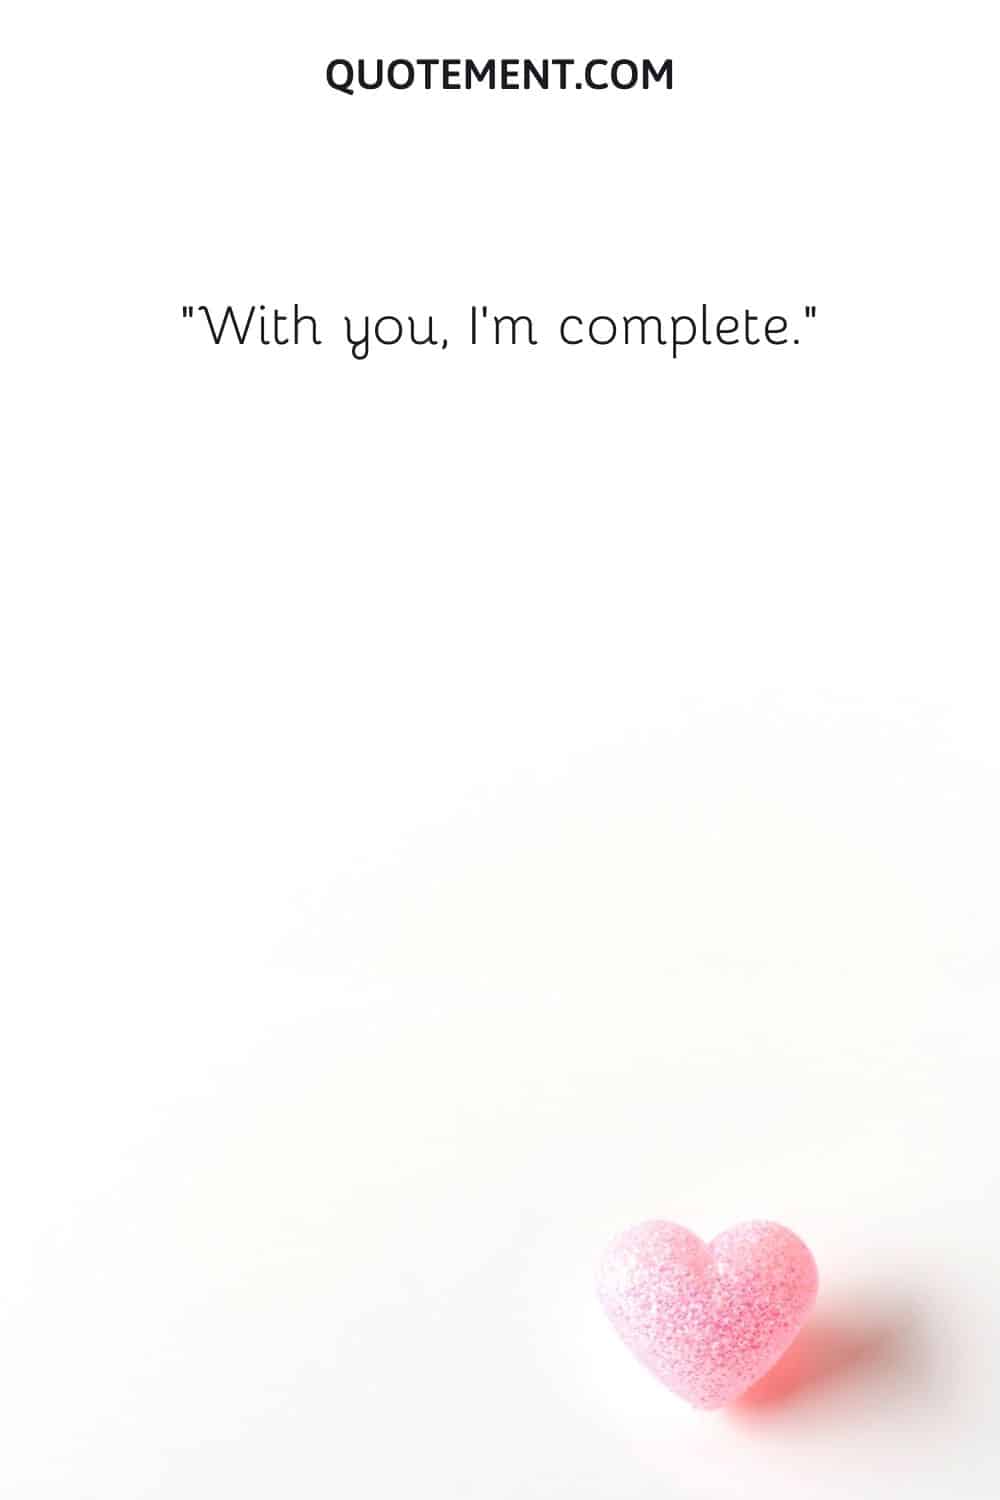 With you, I'm complete. 